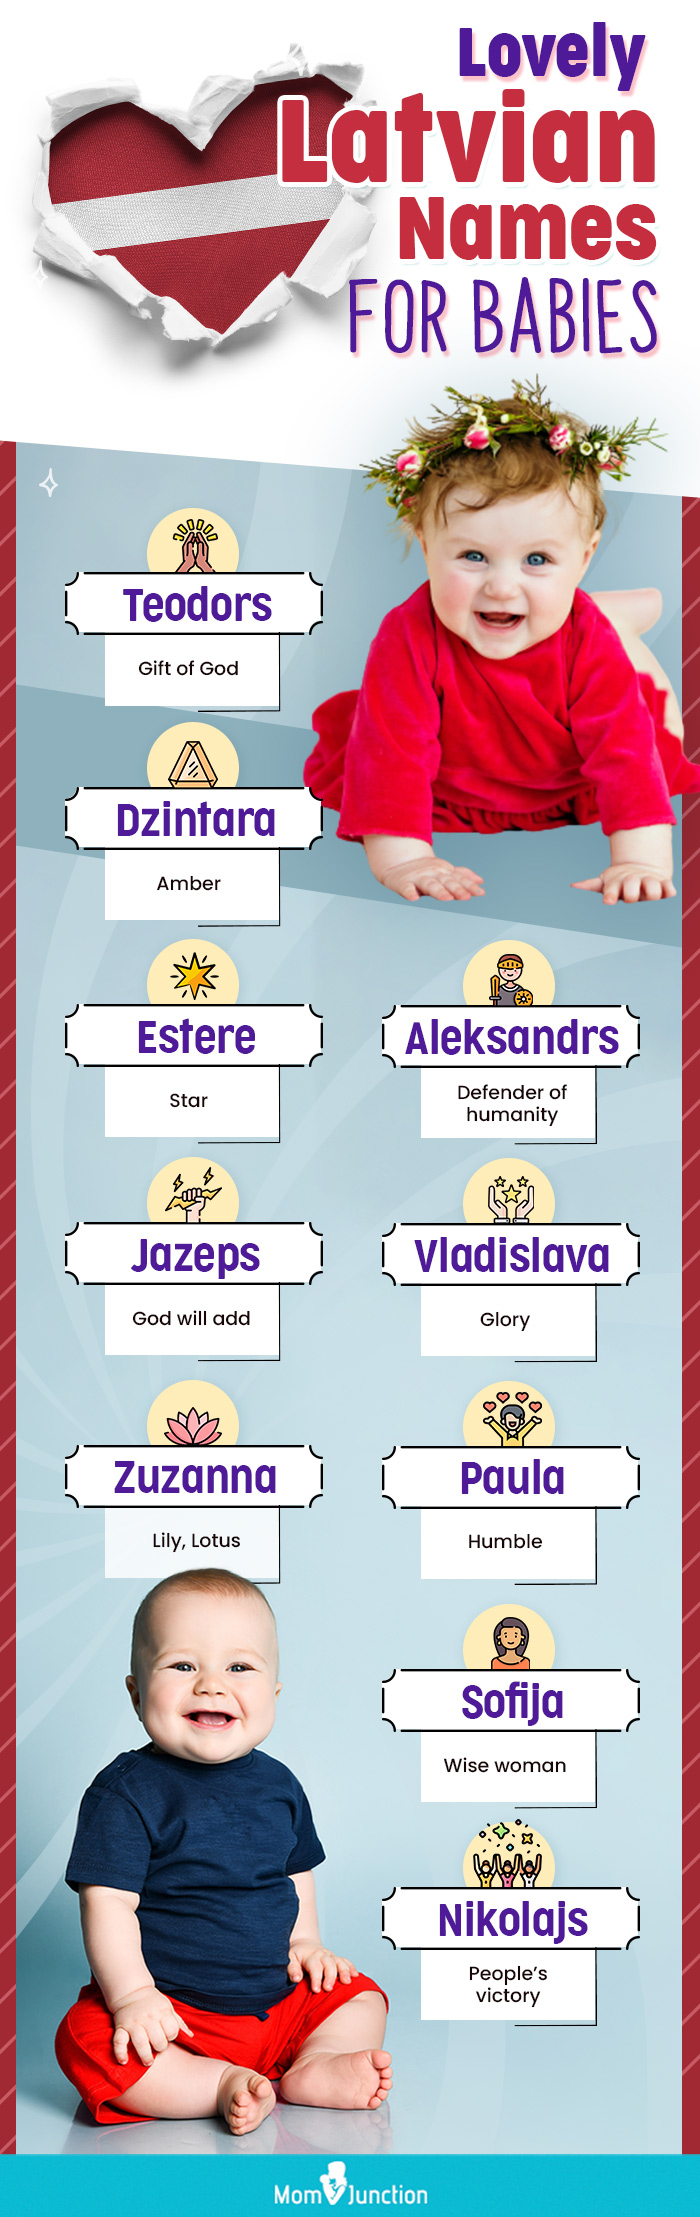 lovely latvian names for babies (infographic)